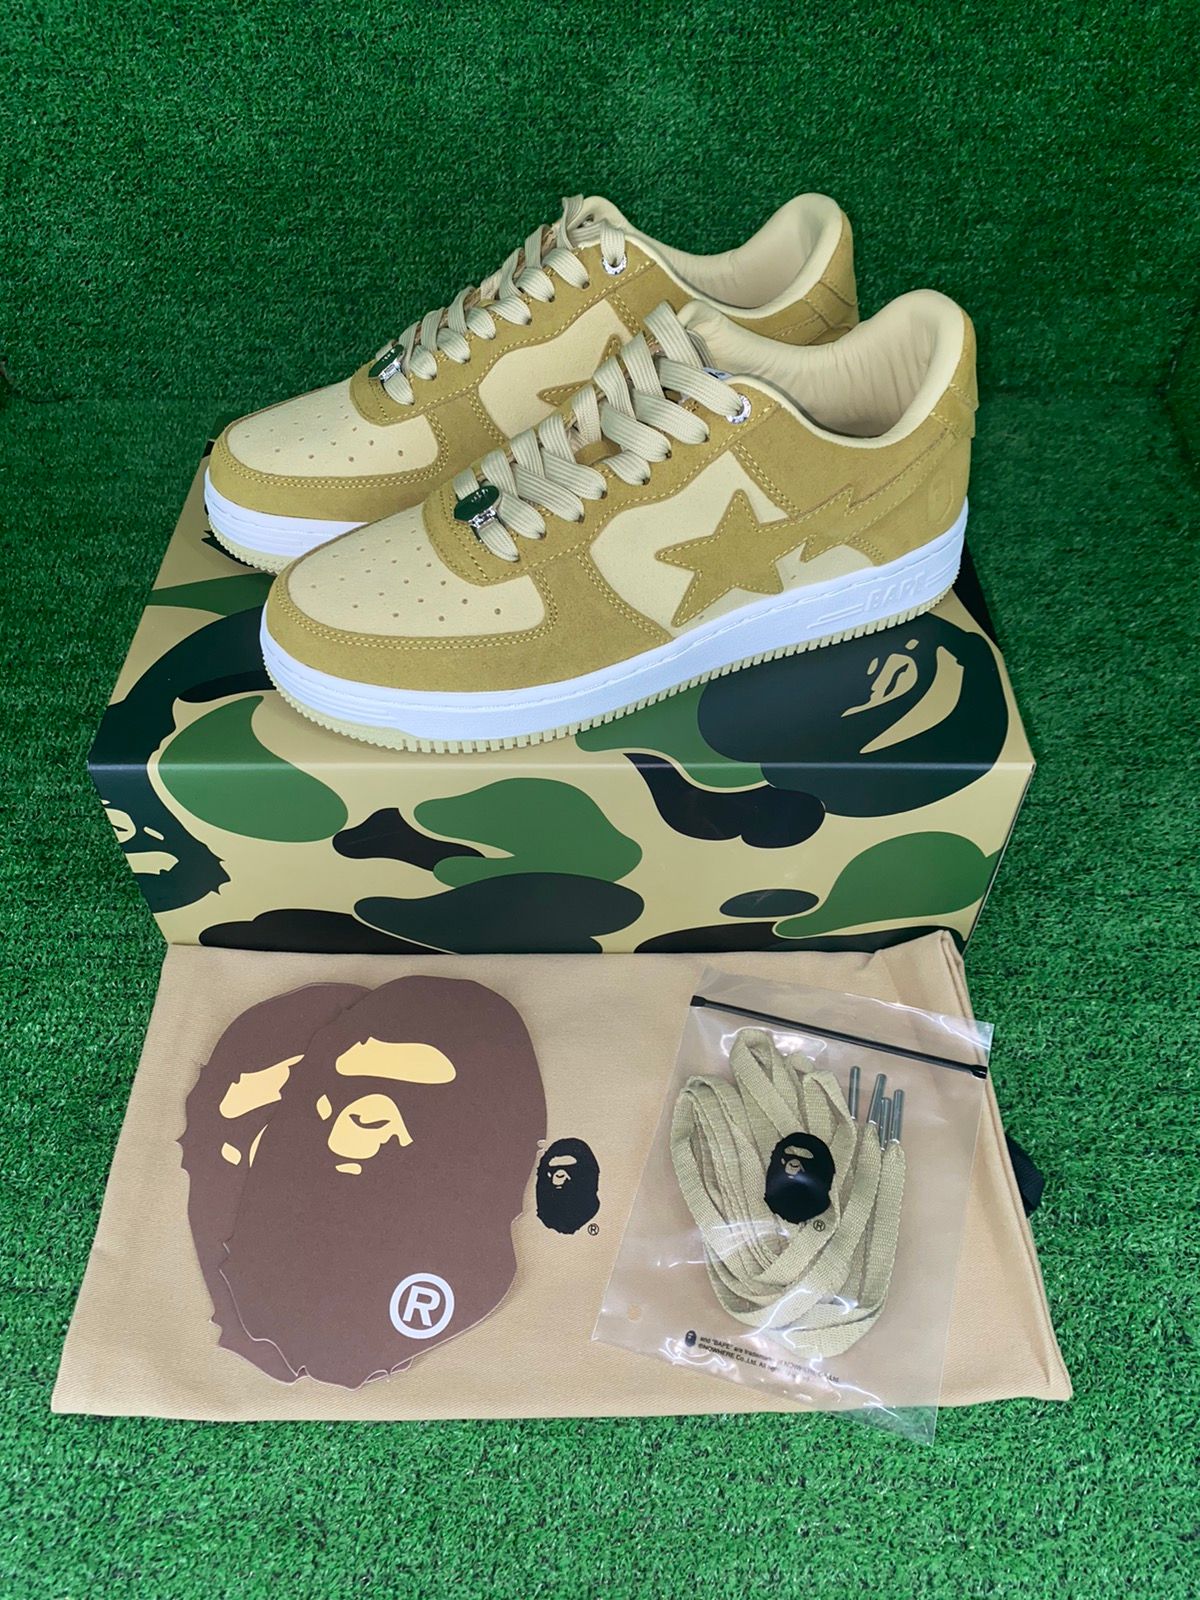 Pre-owned Bape Sta 3 Suede Beige Size 9 Shoes